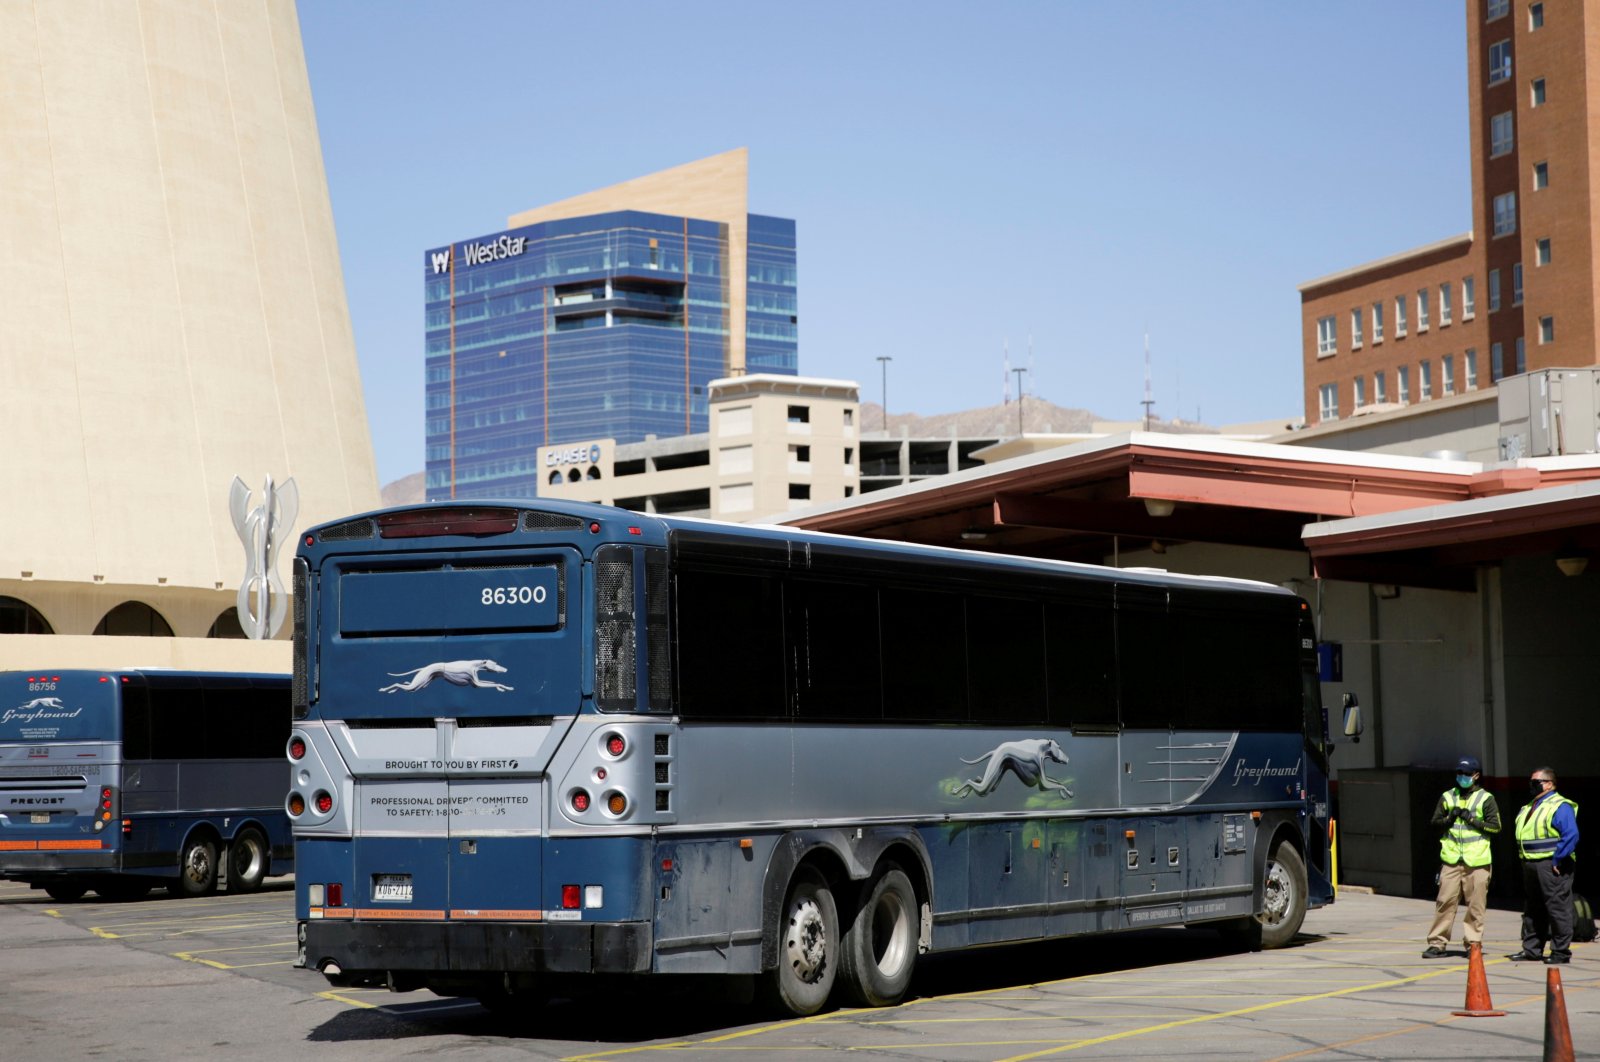 Buses are parked at the Greyhound bus station, in El Paso, Texas, U.S. March 5, 2021. (Reuters Photo)